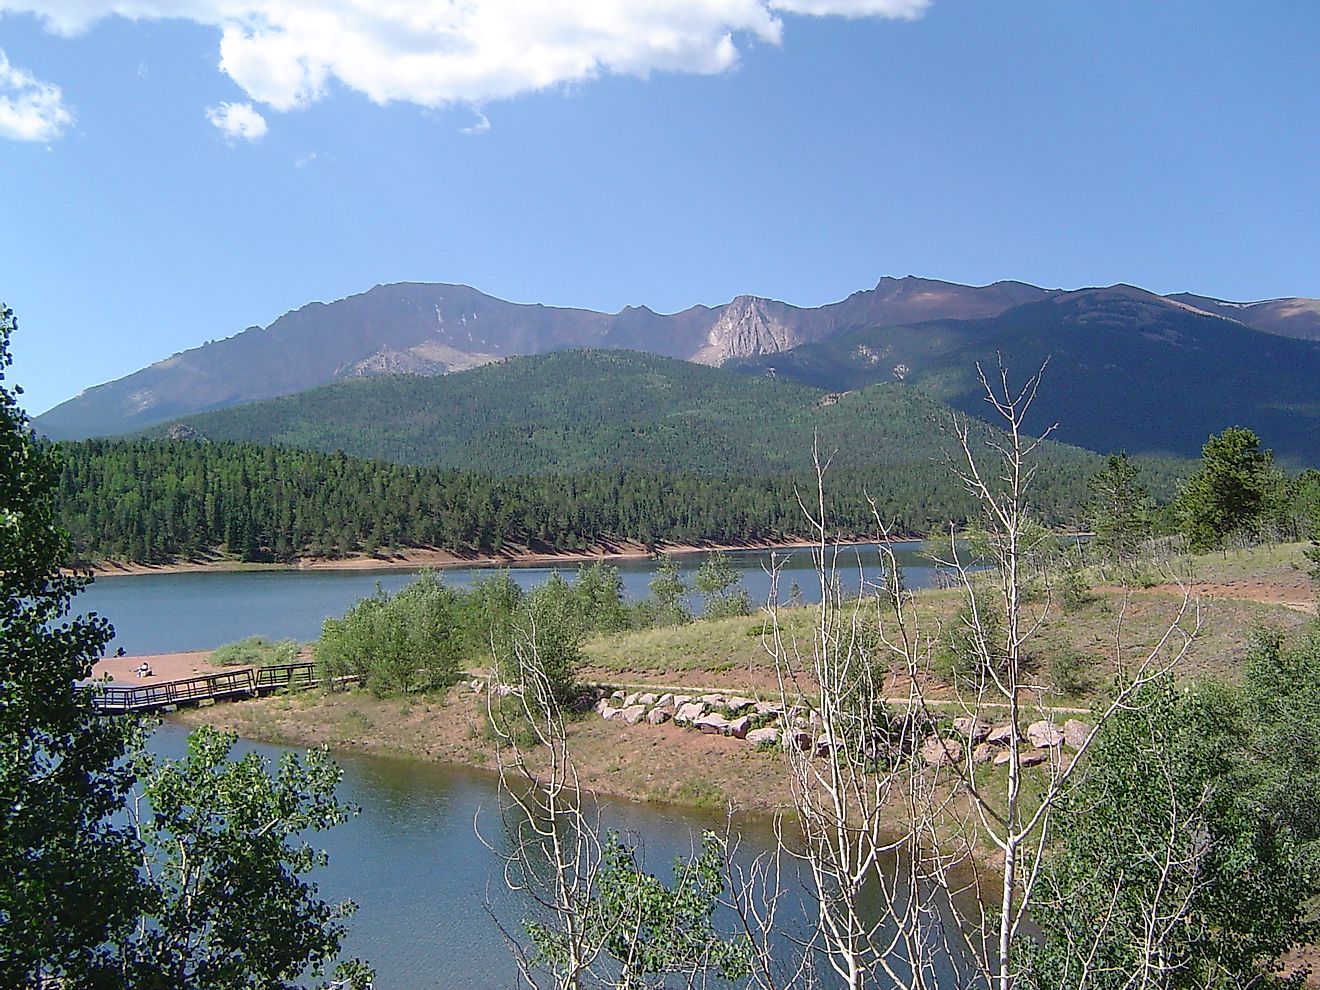 The scenic Pike National Forest in Colorado, US, is one of the oldest national forests in the country.